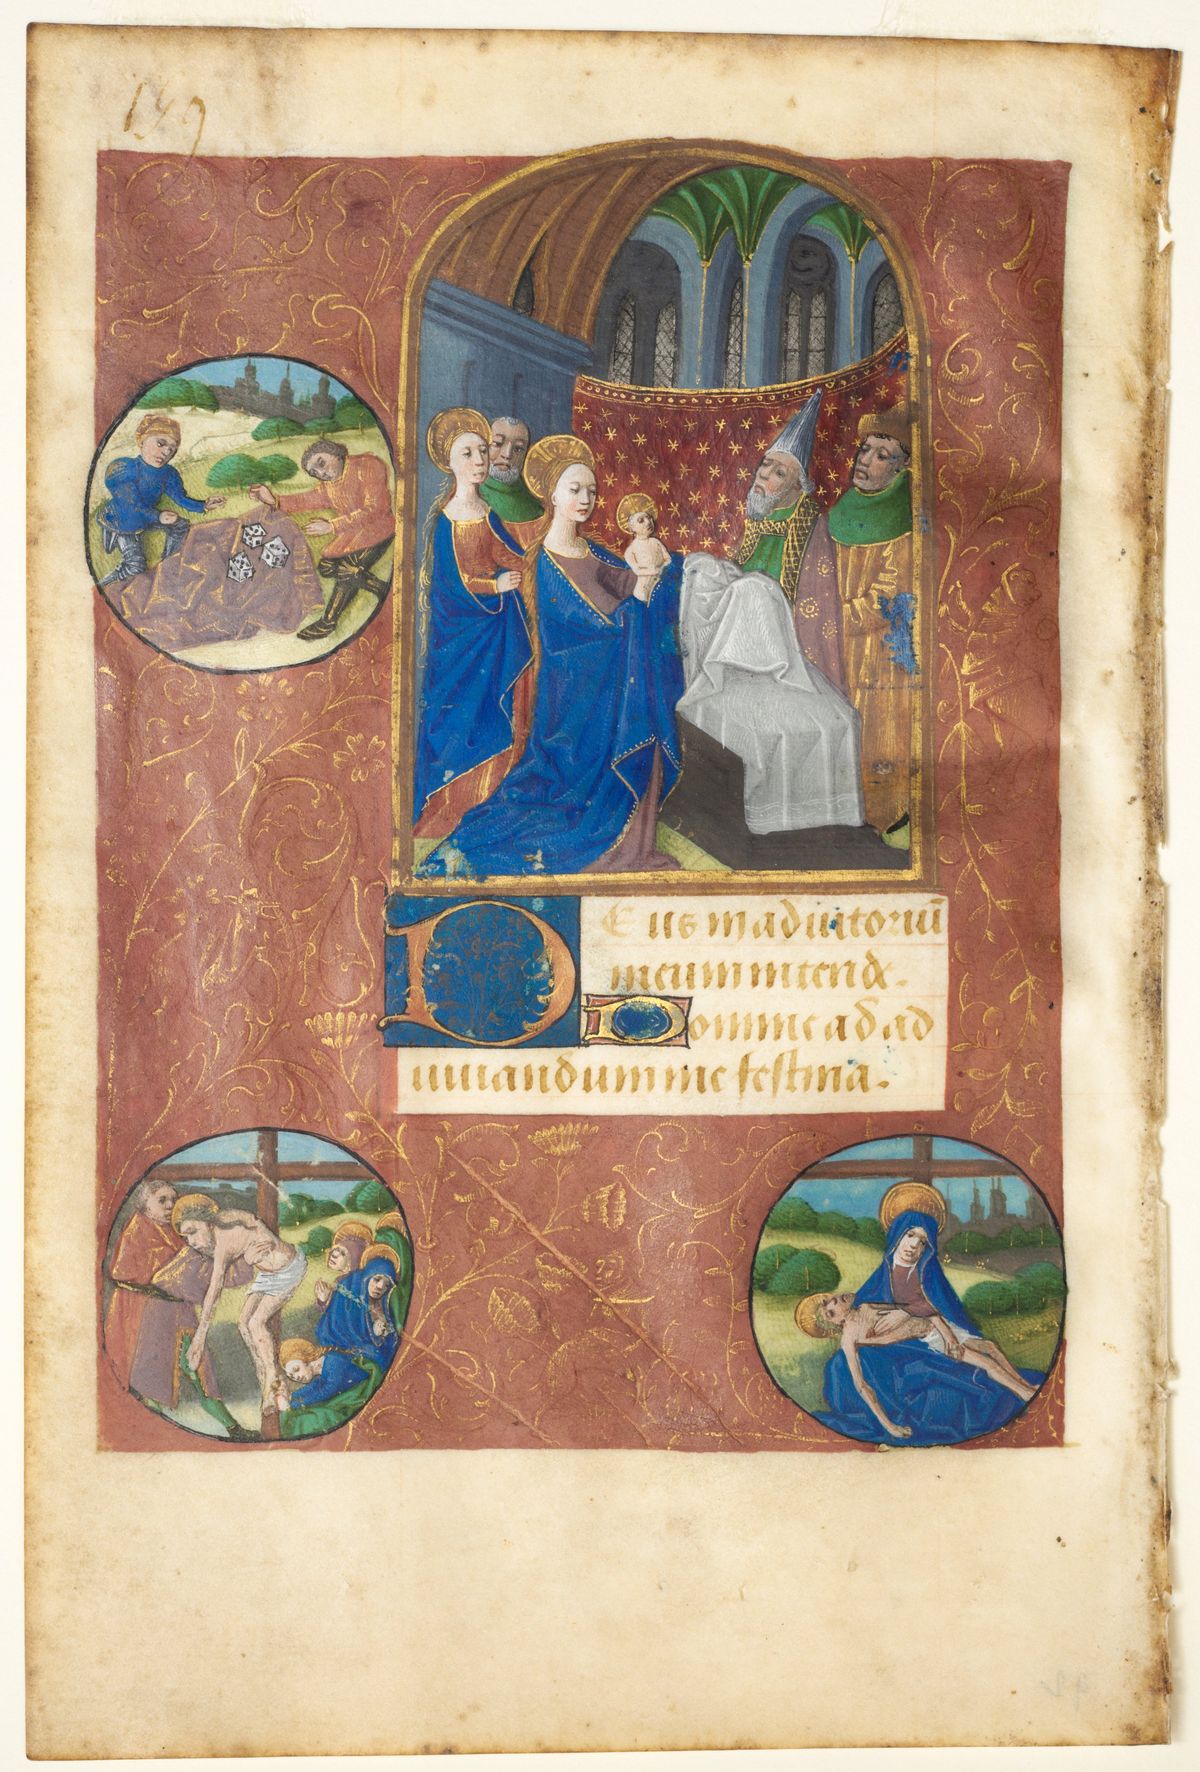 Leaf from a Book of Hours: Presentation in the Temple with Roundels of the Casting of Lots, the Deposition, and Pietà (None, Office of the Virgin) (1460–1470) by the follower of Master of Adélaïde de Savoie - Public Domain Illuminated Manuscript